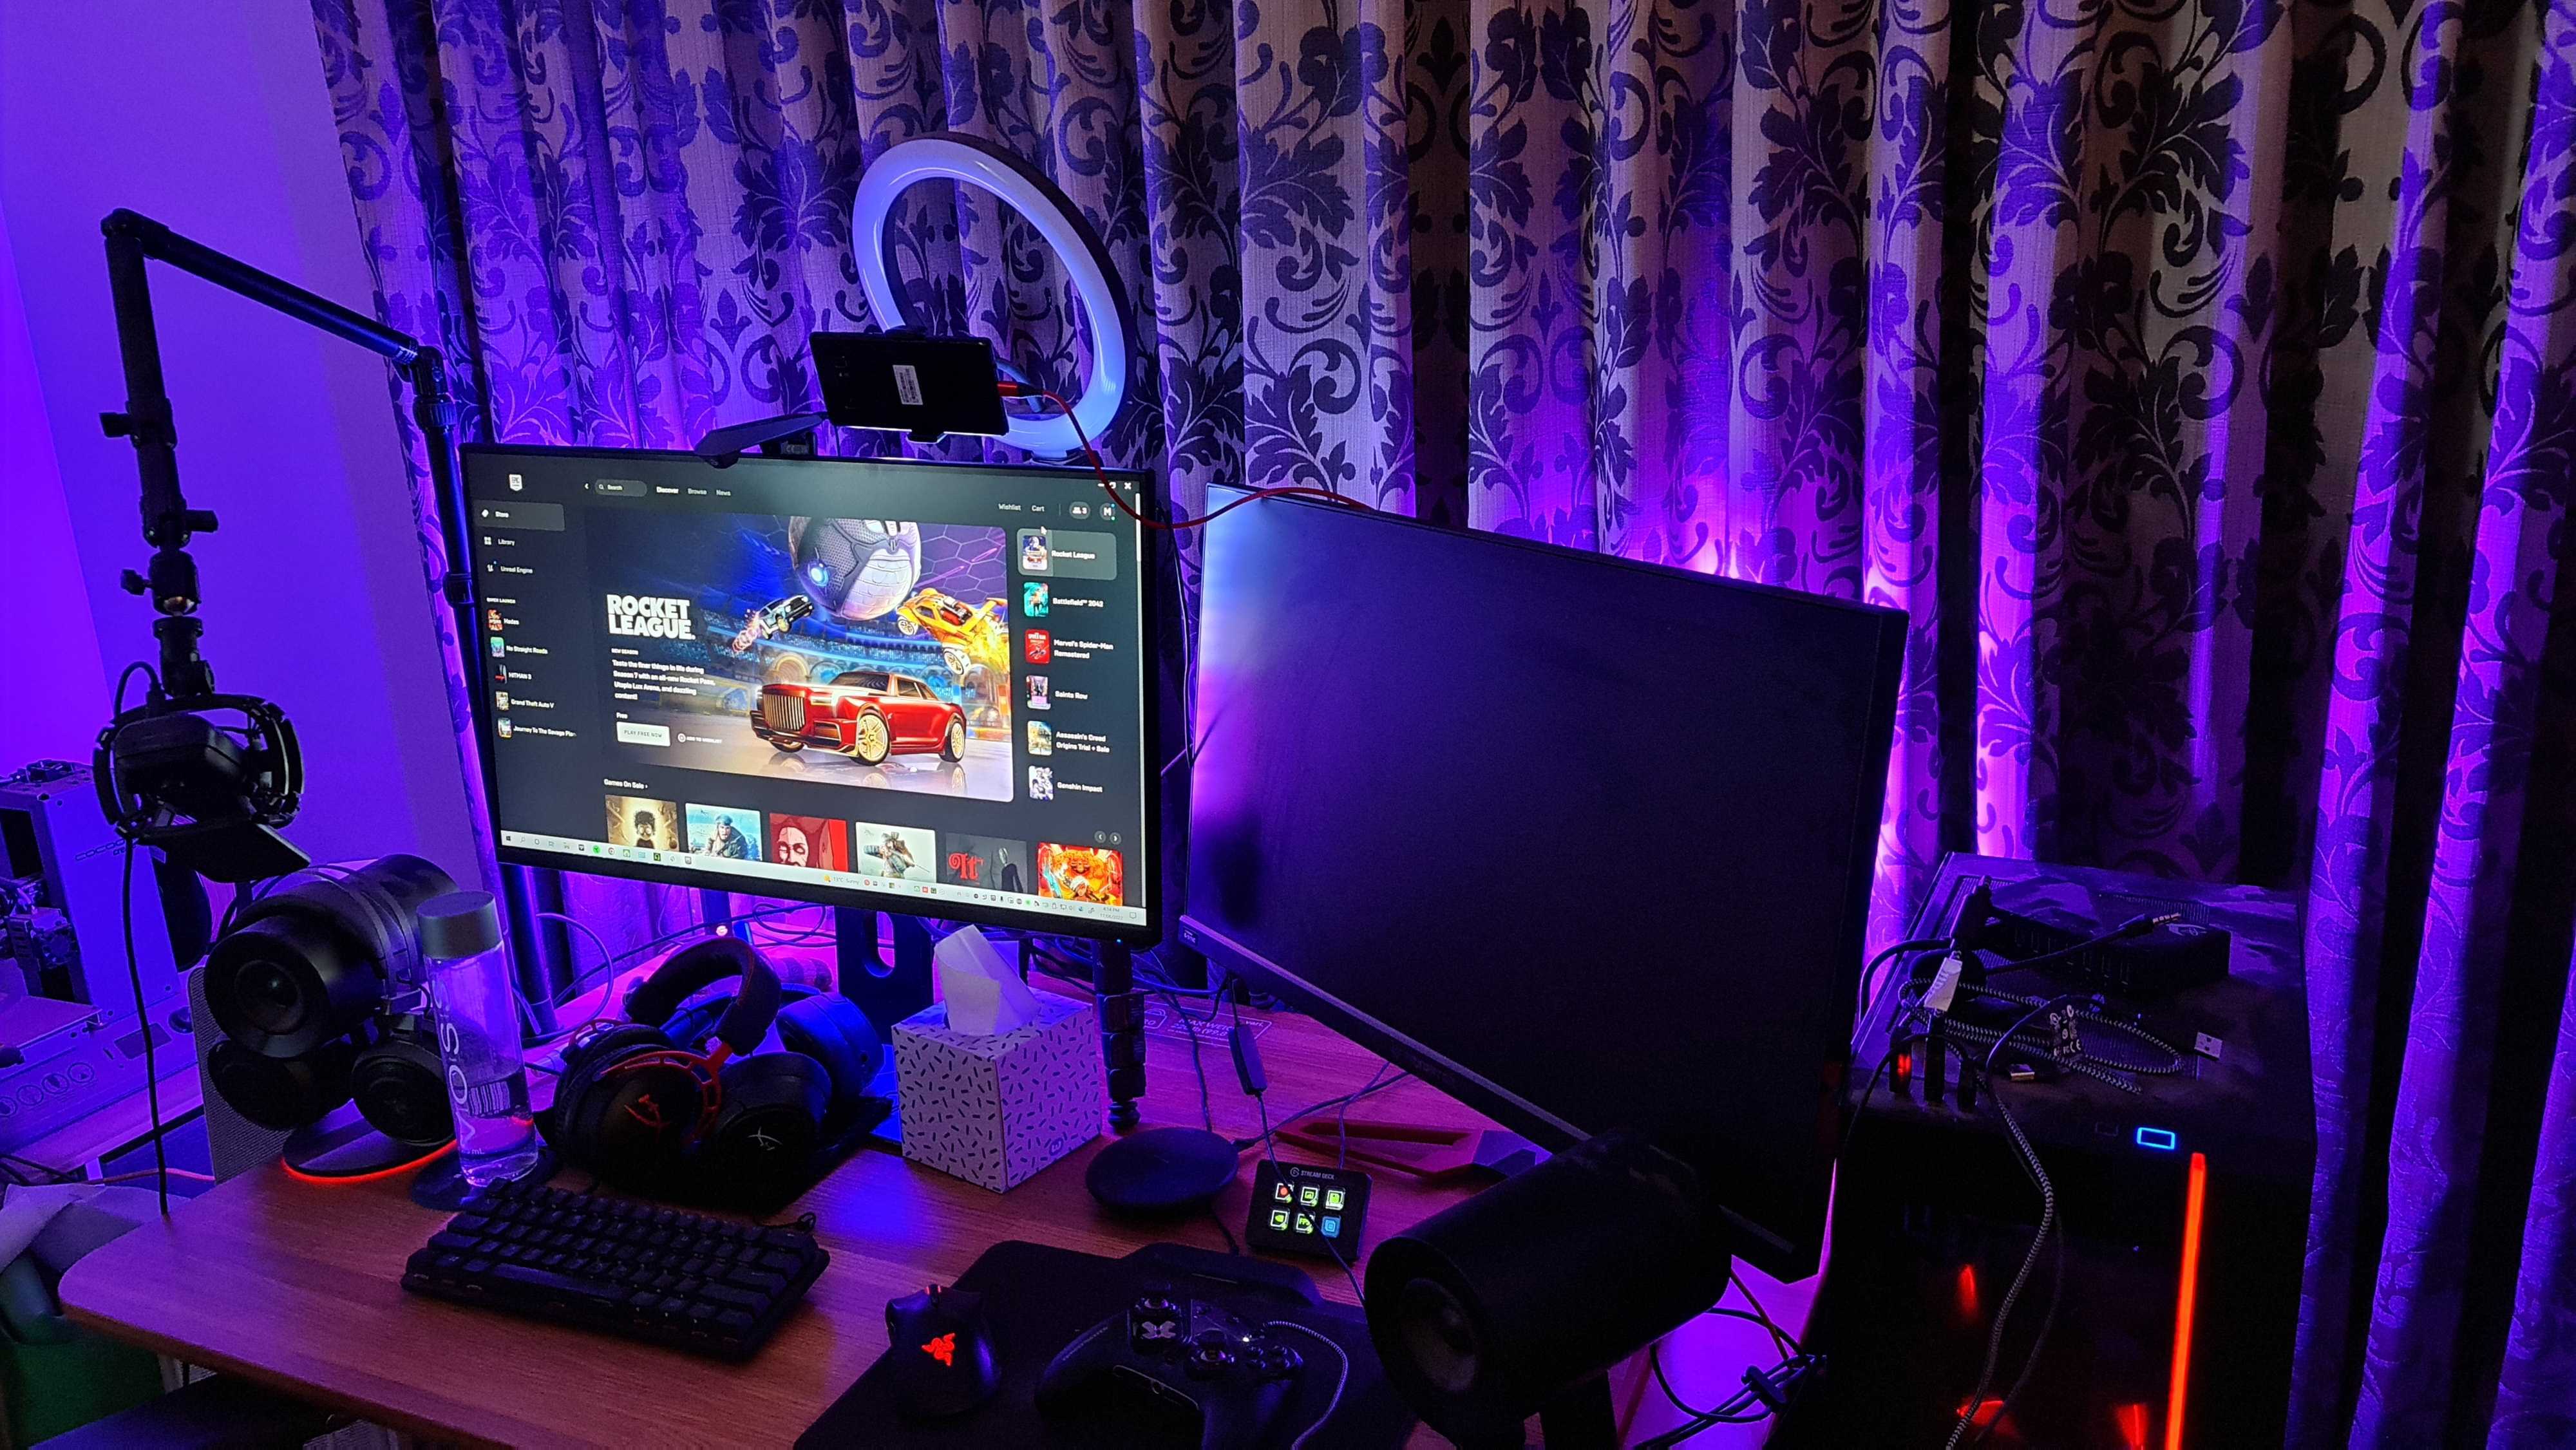  Govee DreamView G1 Pro gaming light 